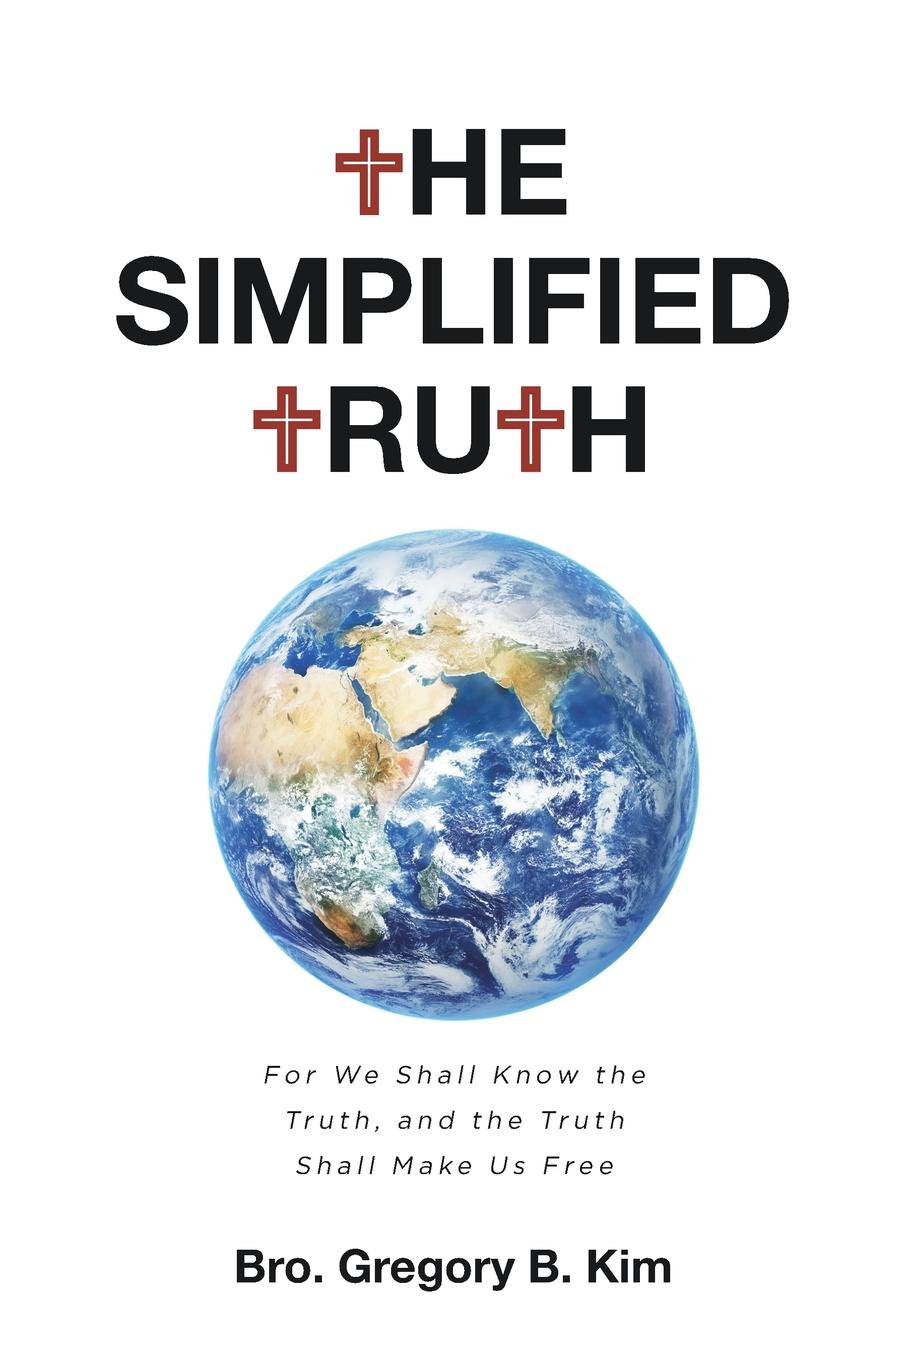 The Simplified Truth. For We Shall Know the Truth, and the Truth Shall Make Us Free